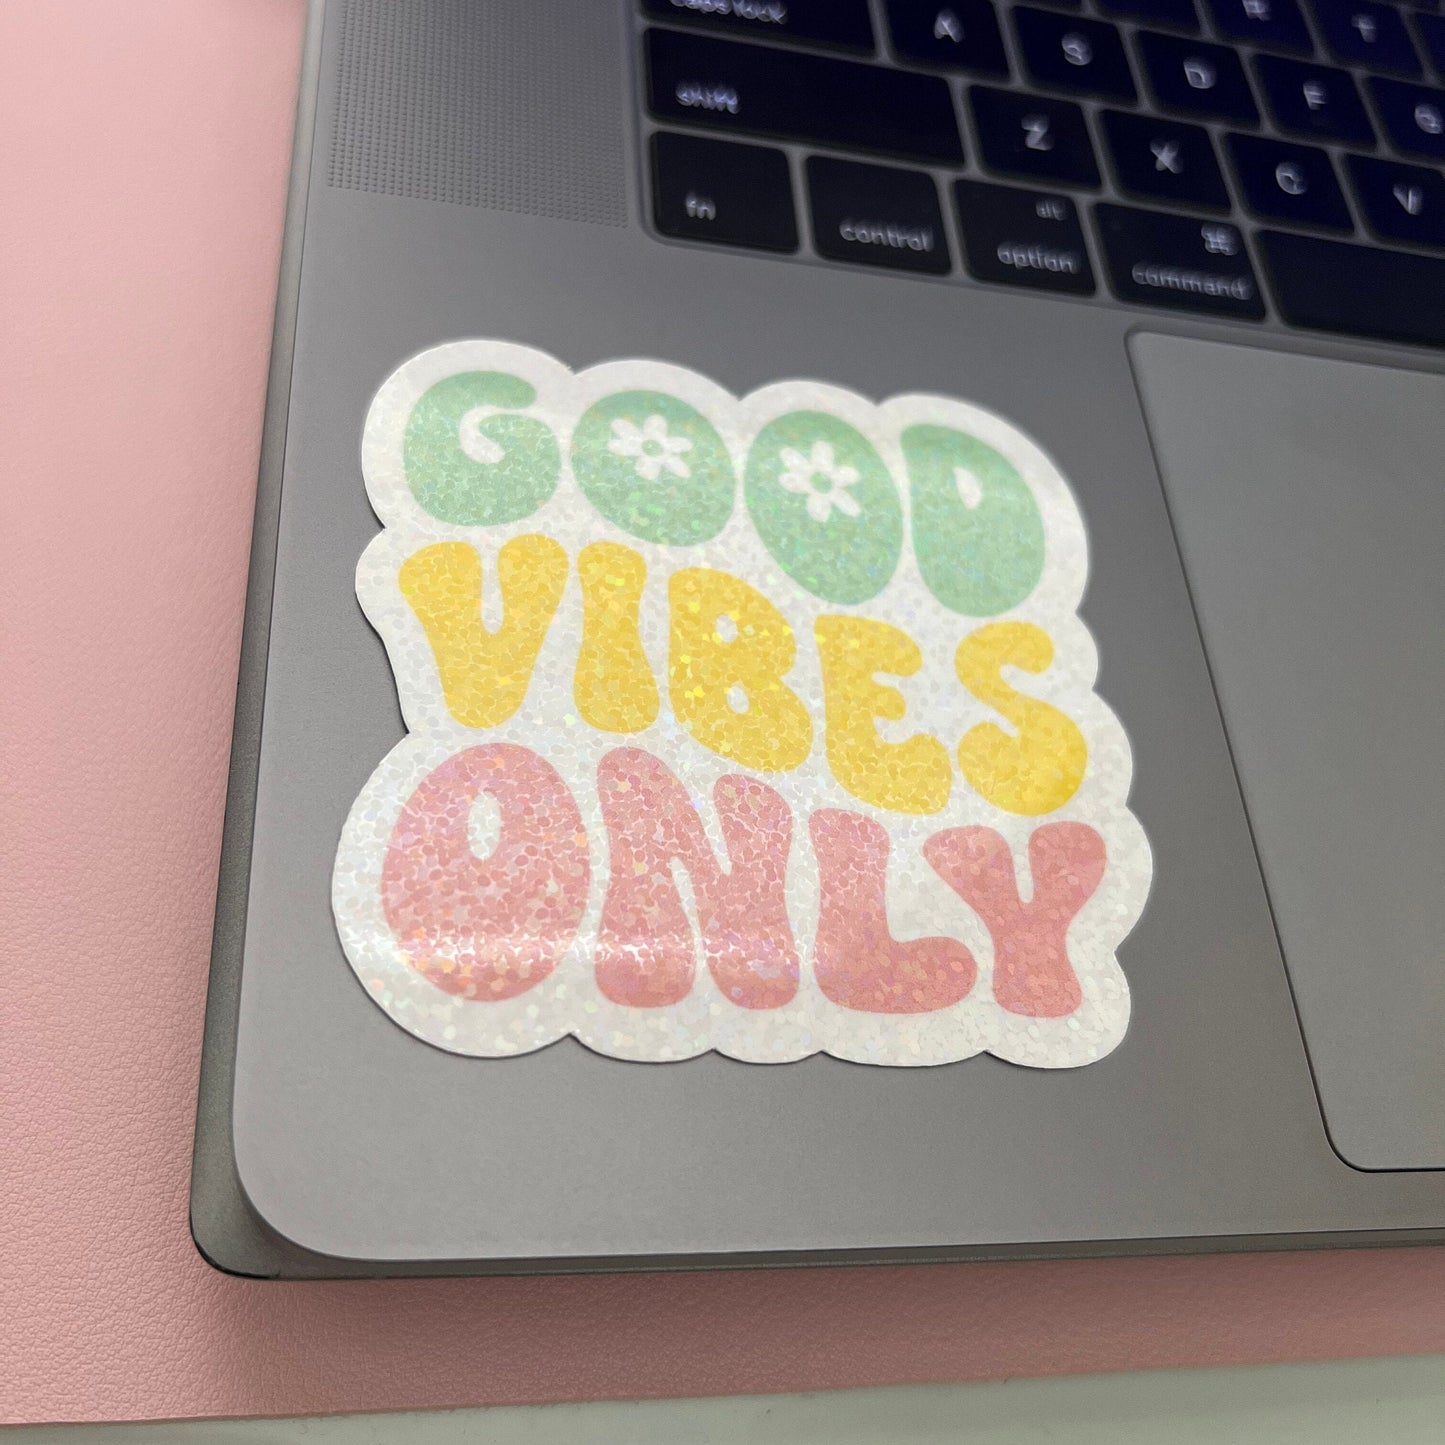 Good Vibes Only Holographic Sticker - Colorful Positive Affirmation Decal for Laptops, Journals, Water Bottles & More